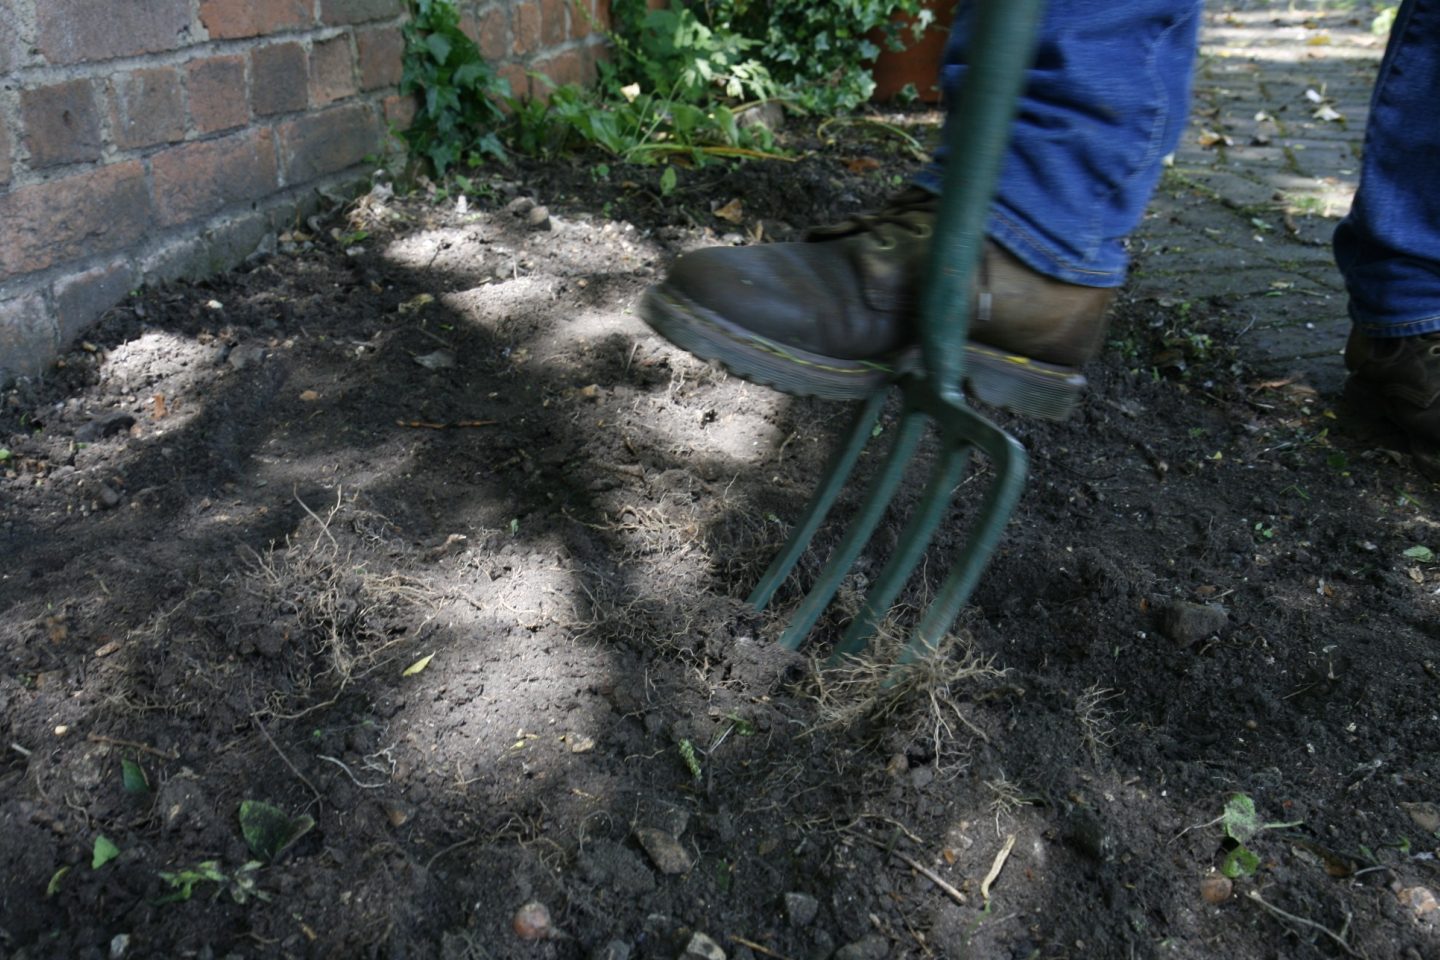 A person digs in the soil using a garden fork